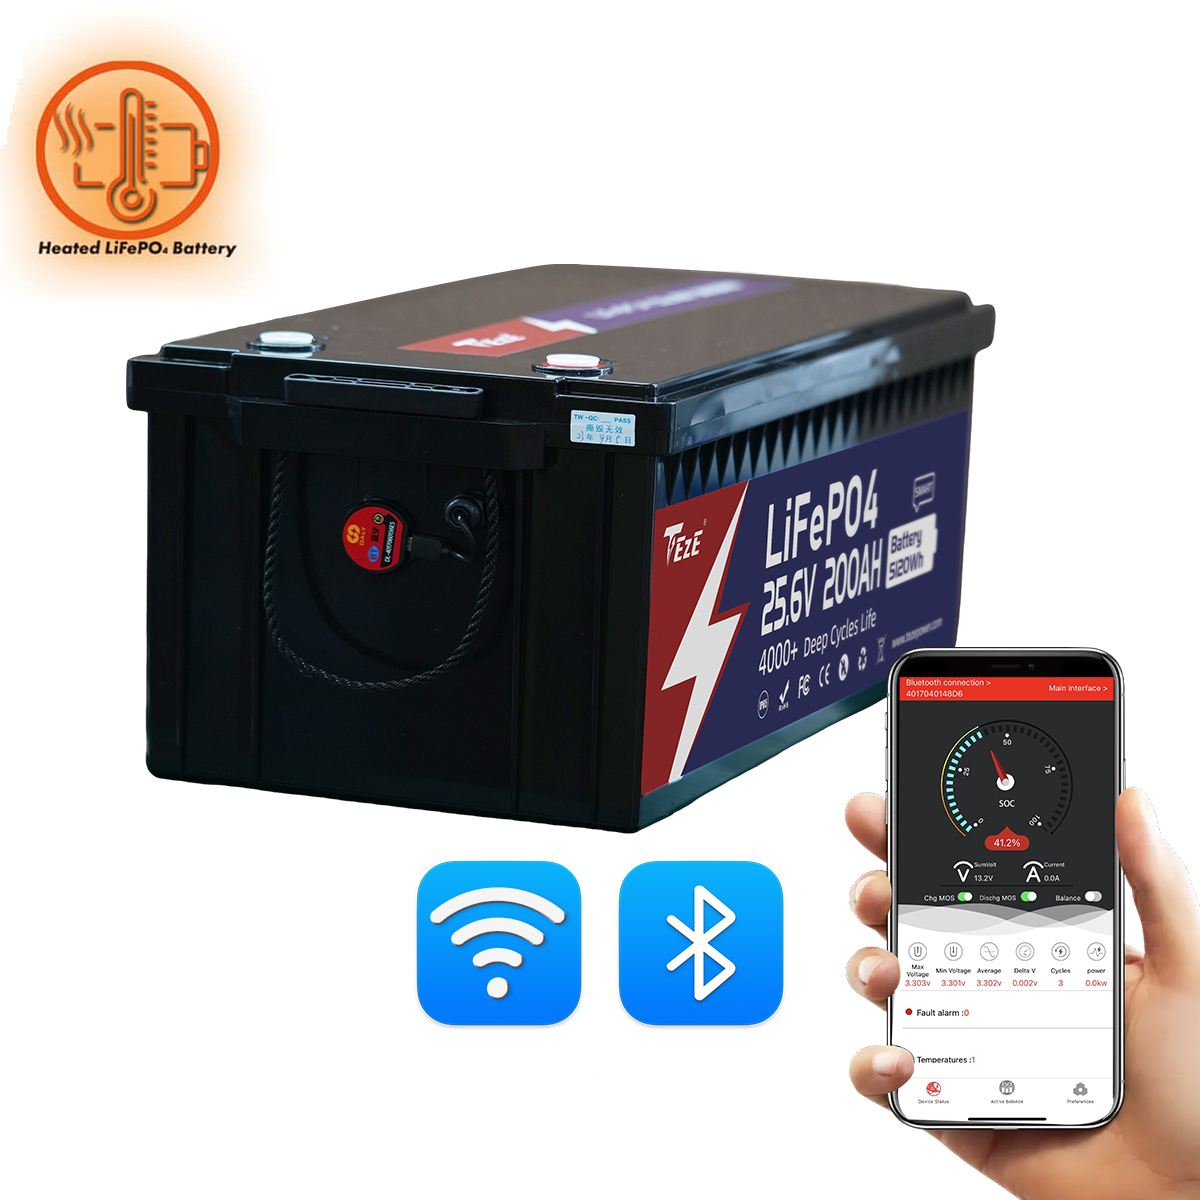 New Add WiFi-TezePower 24V 200Ah LiFePO4 Battery with WiFi and Bluetooth, Self-heating and Active Balancer, Built-in 200A Daly BMS(WiFi External Version)-TezePower